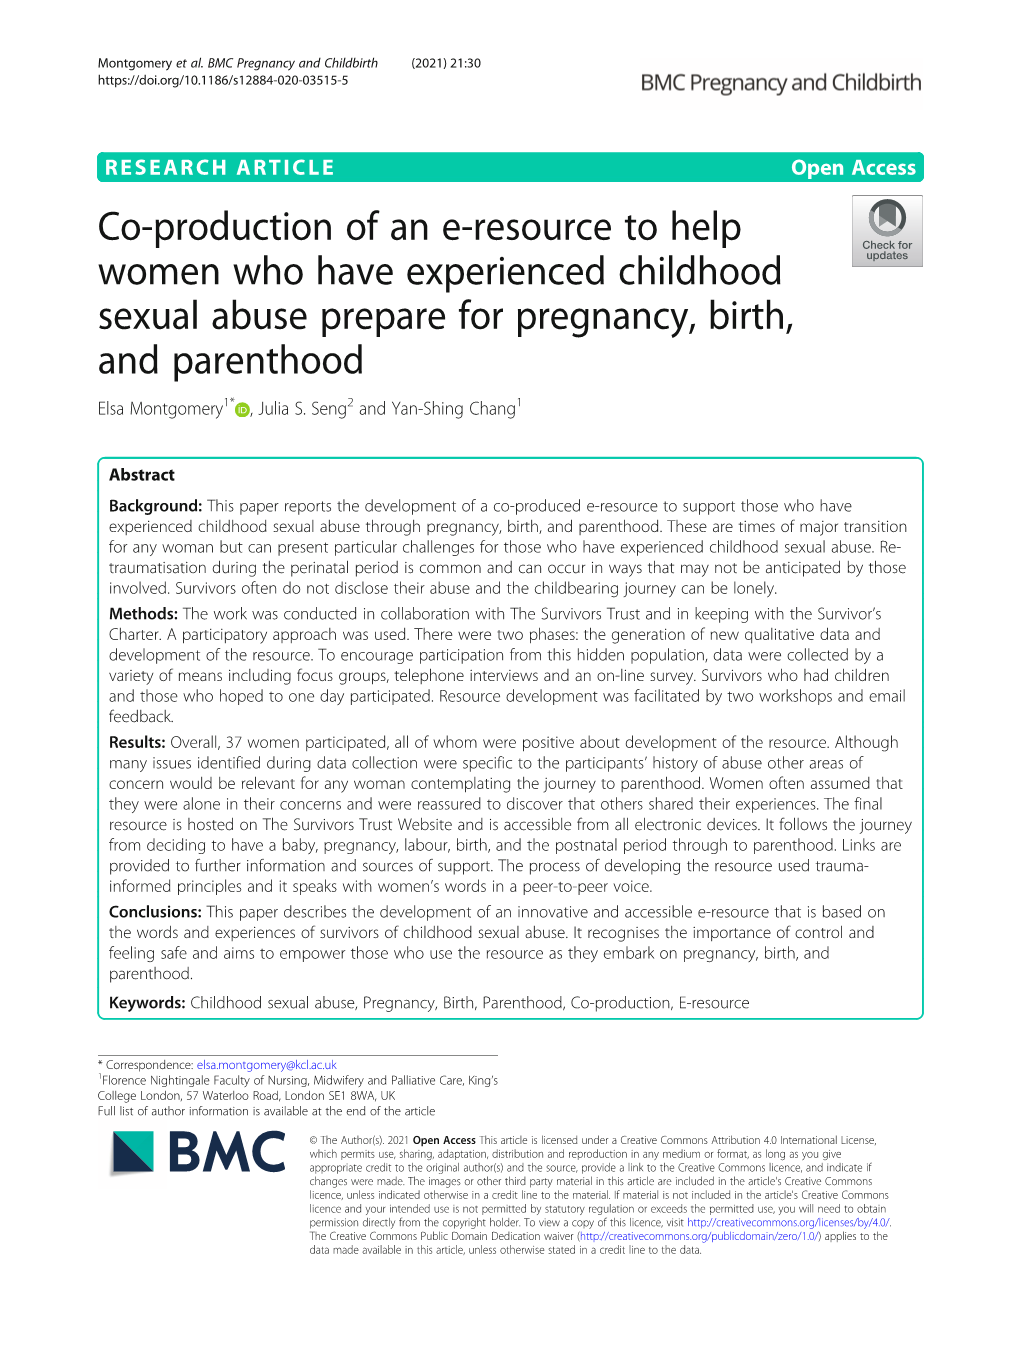 Co-Production of an E-Resource to Help Women Who Have Experienced Childhood Sexual Abuse Prepare for Pregnancy, Birth, and Parenthood Elsa Montgomery1* , Julia S